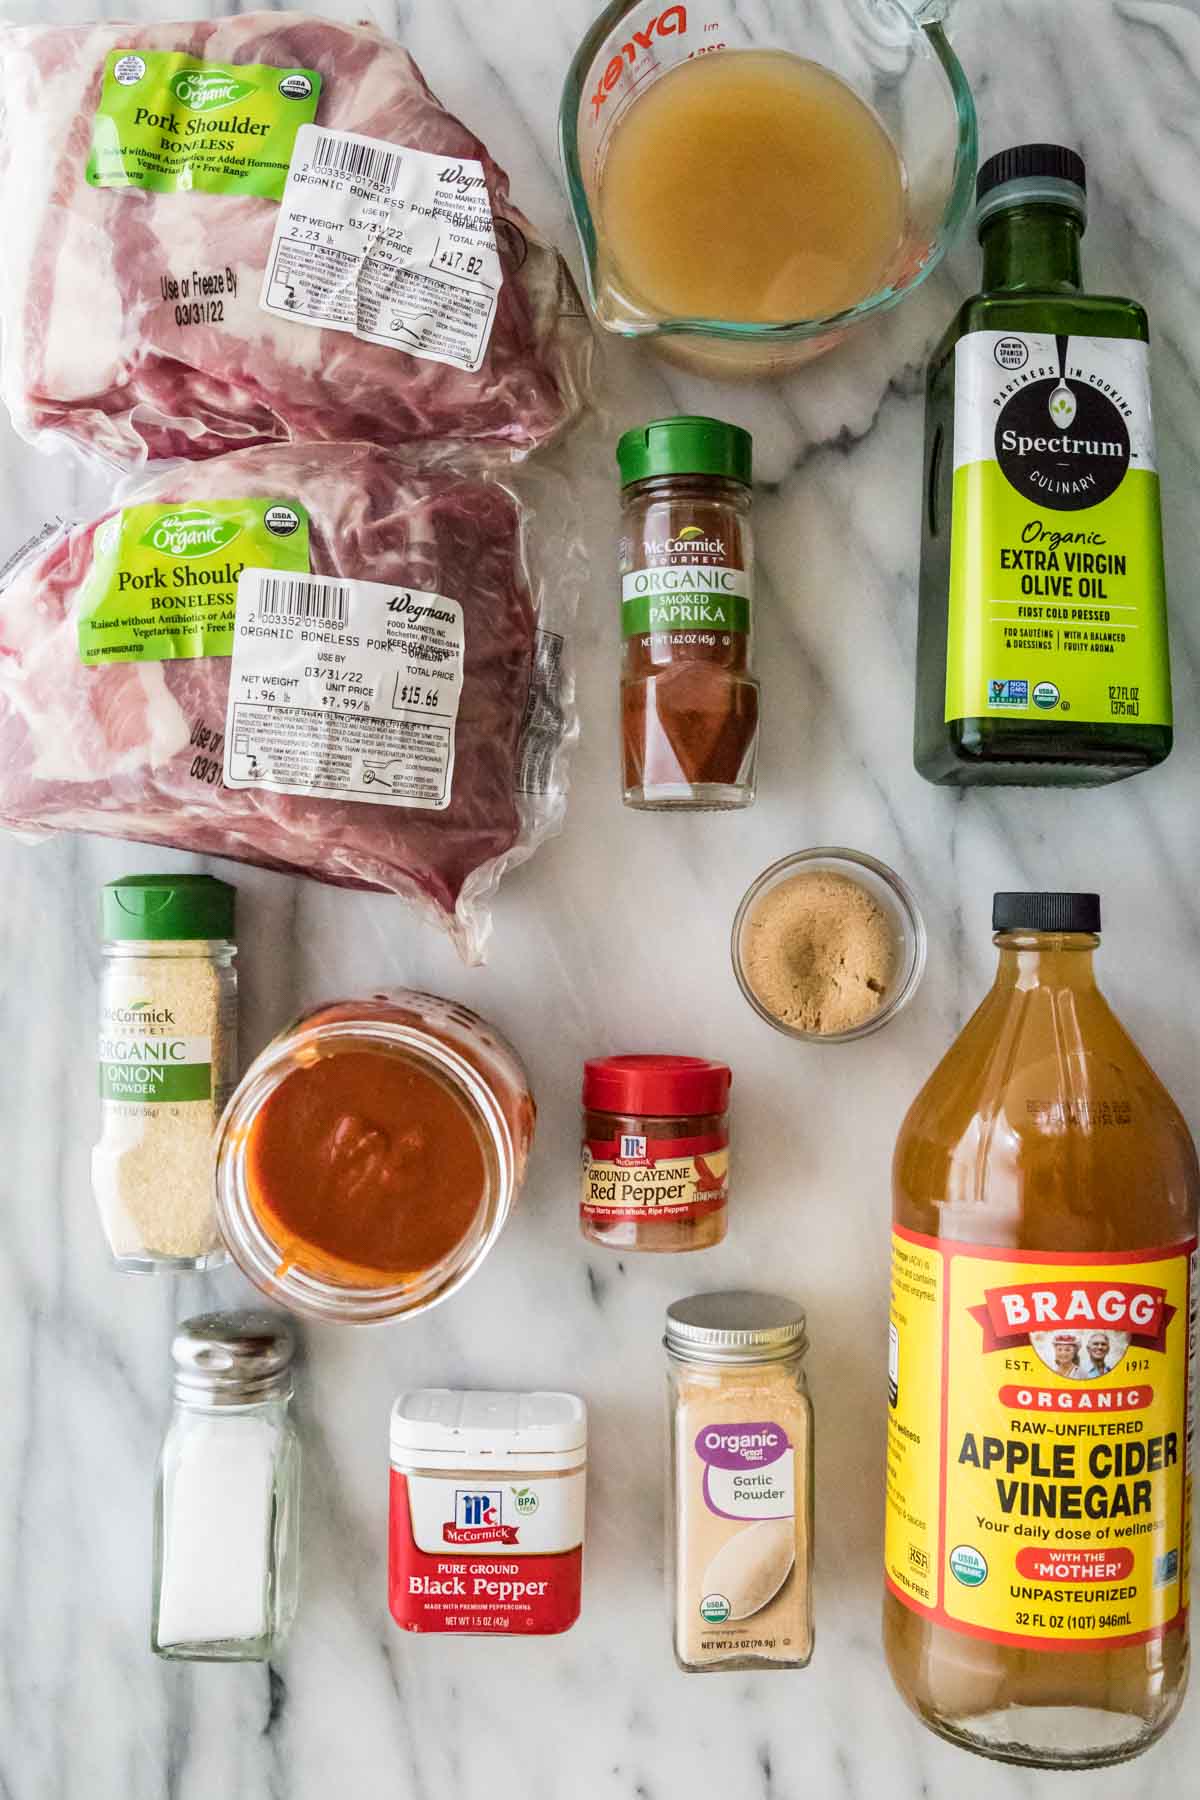 overhead view of ingredients including pork, barbecue sauce, vinegar, spices, and more